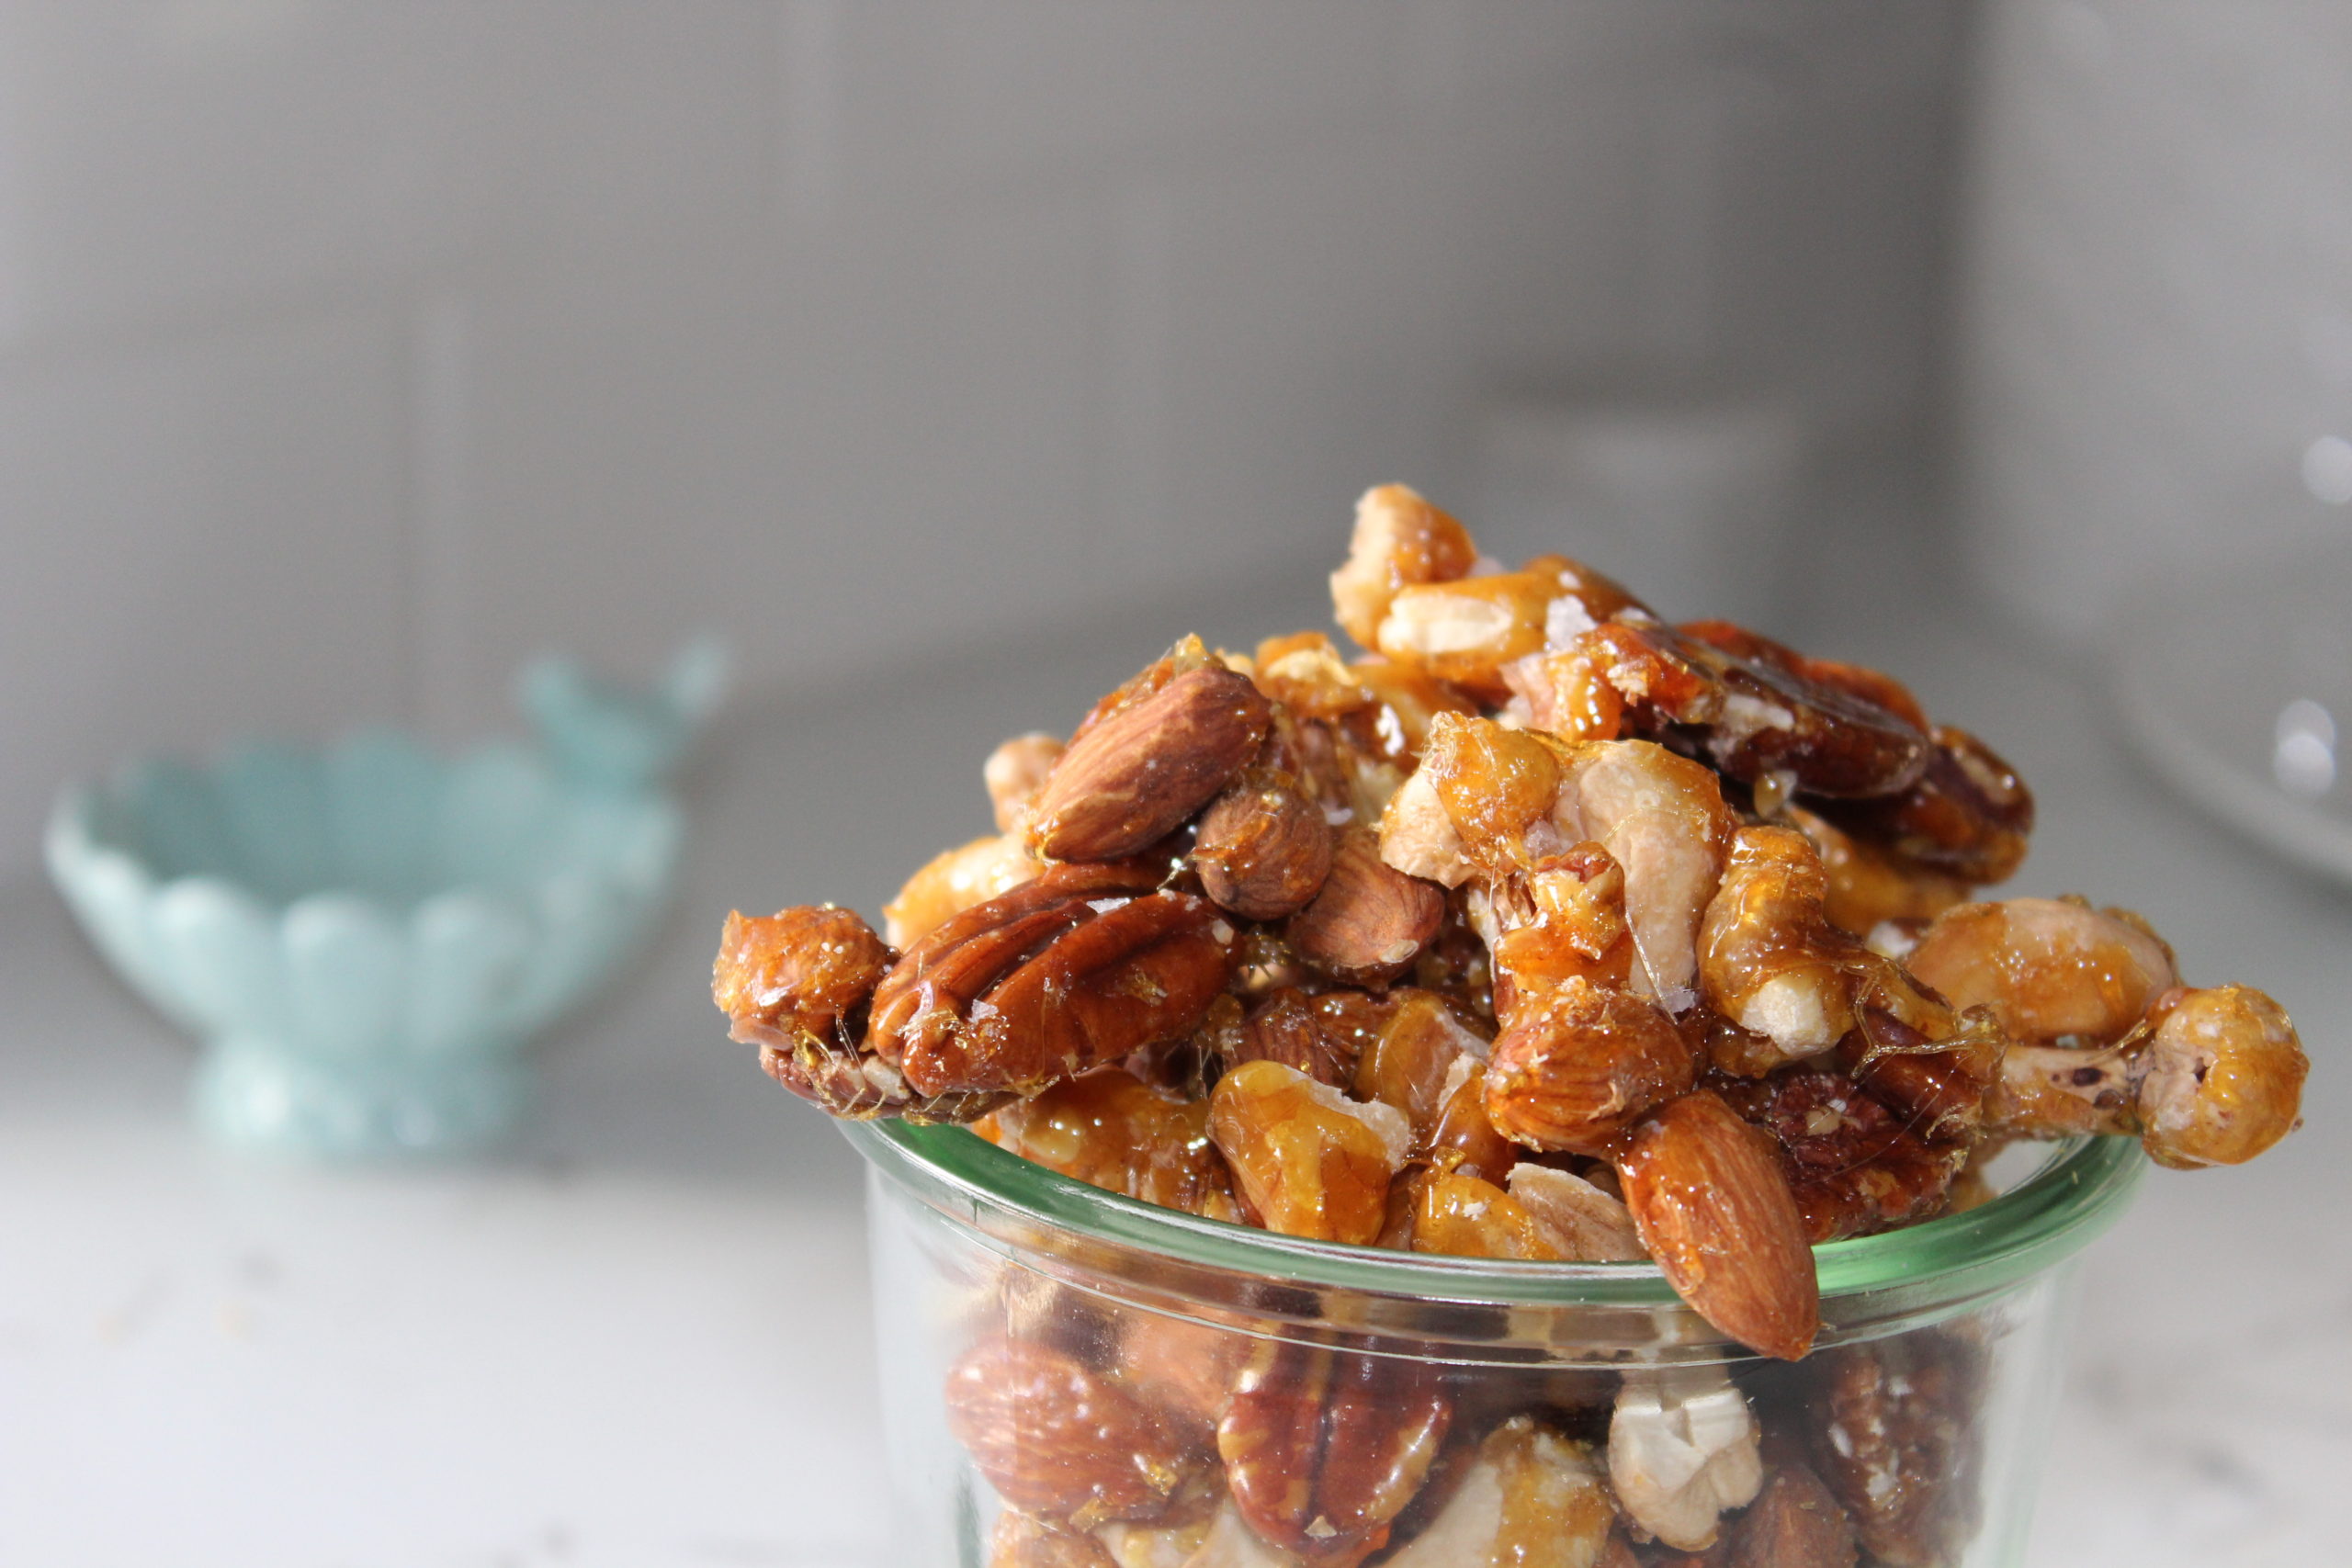 Salted Caramel Nuts